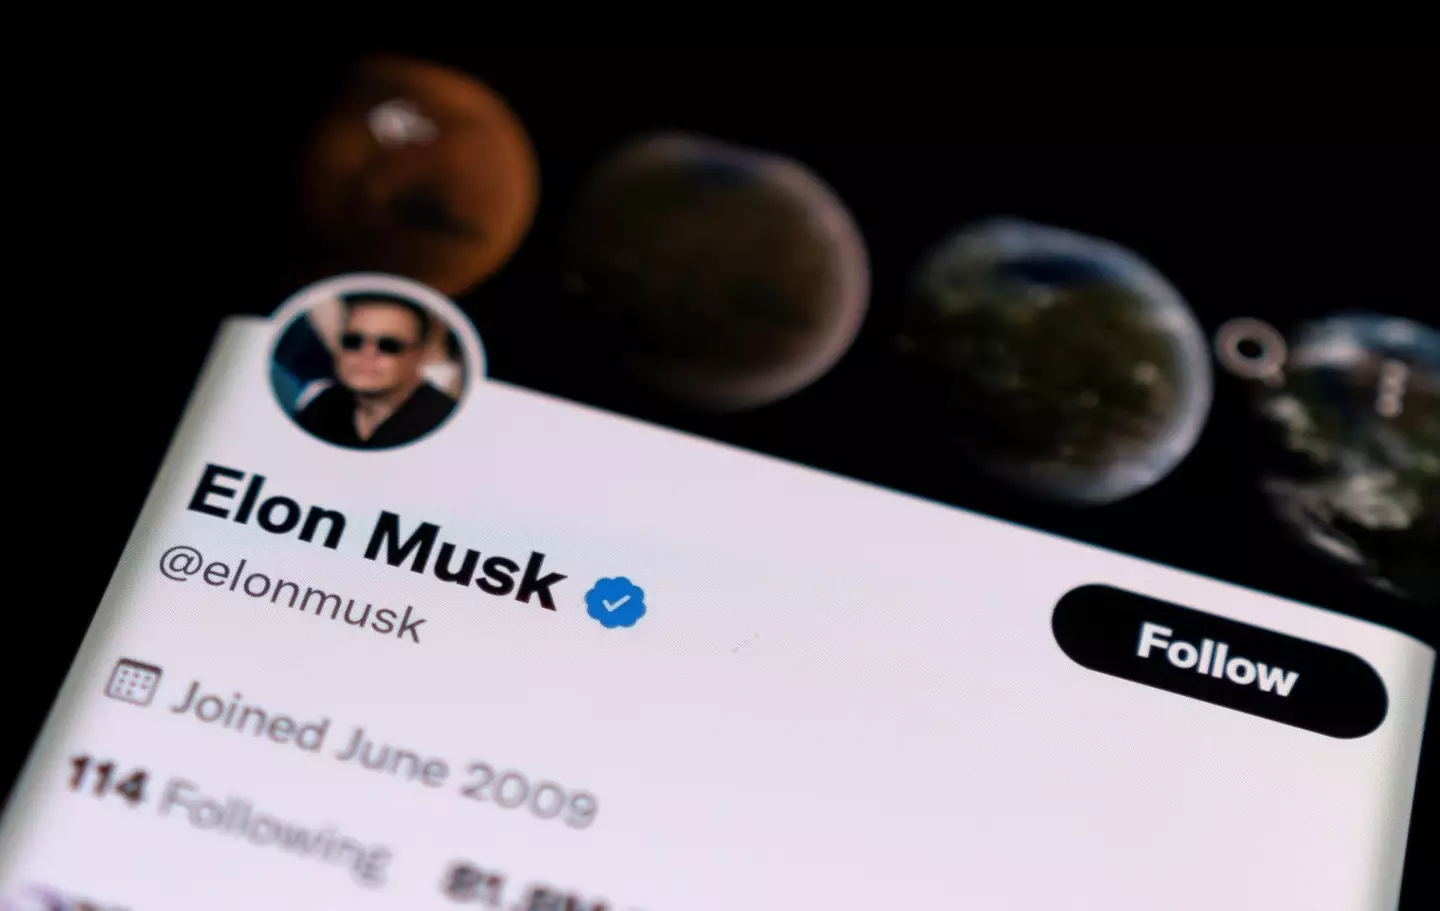 Musk has more than 80 million followers on Twitter.